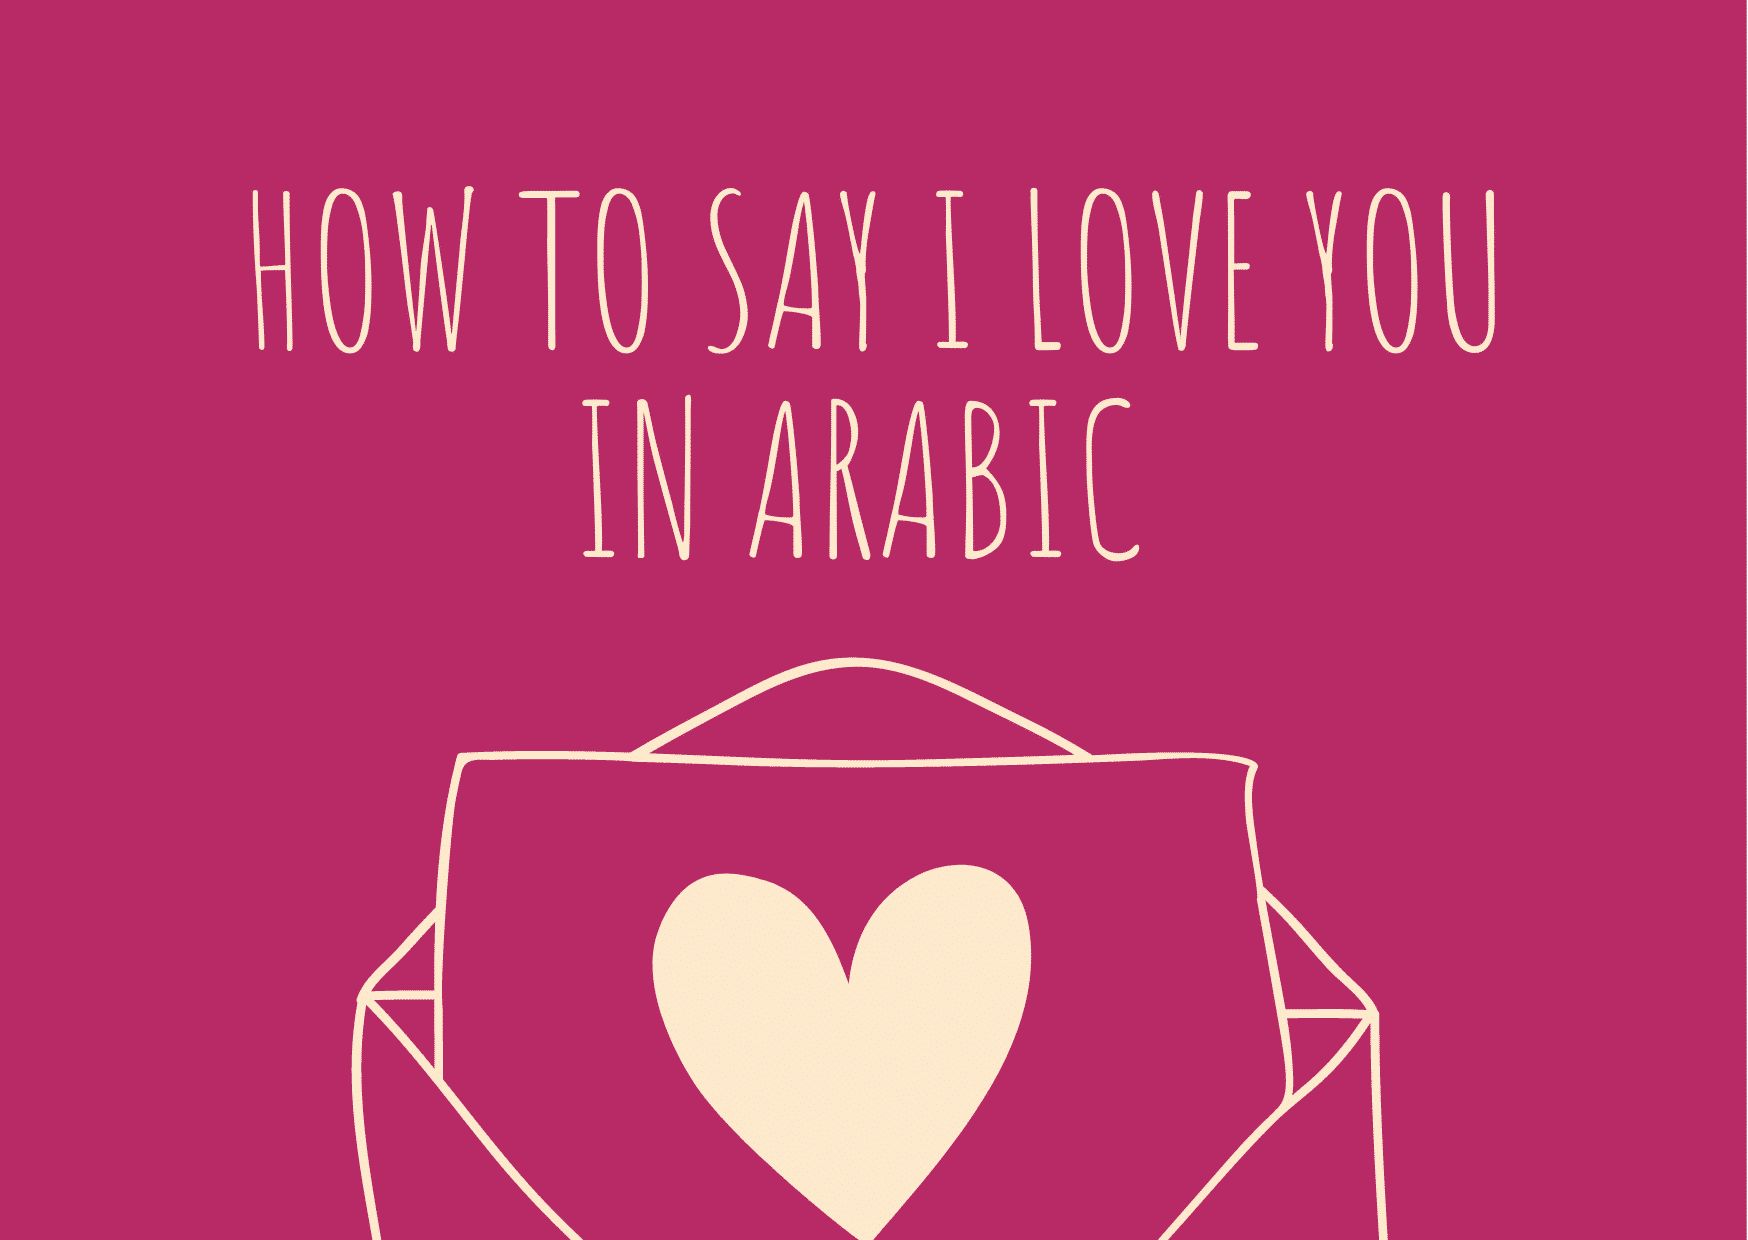 How to say I love you in Arabic